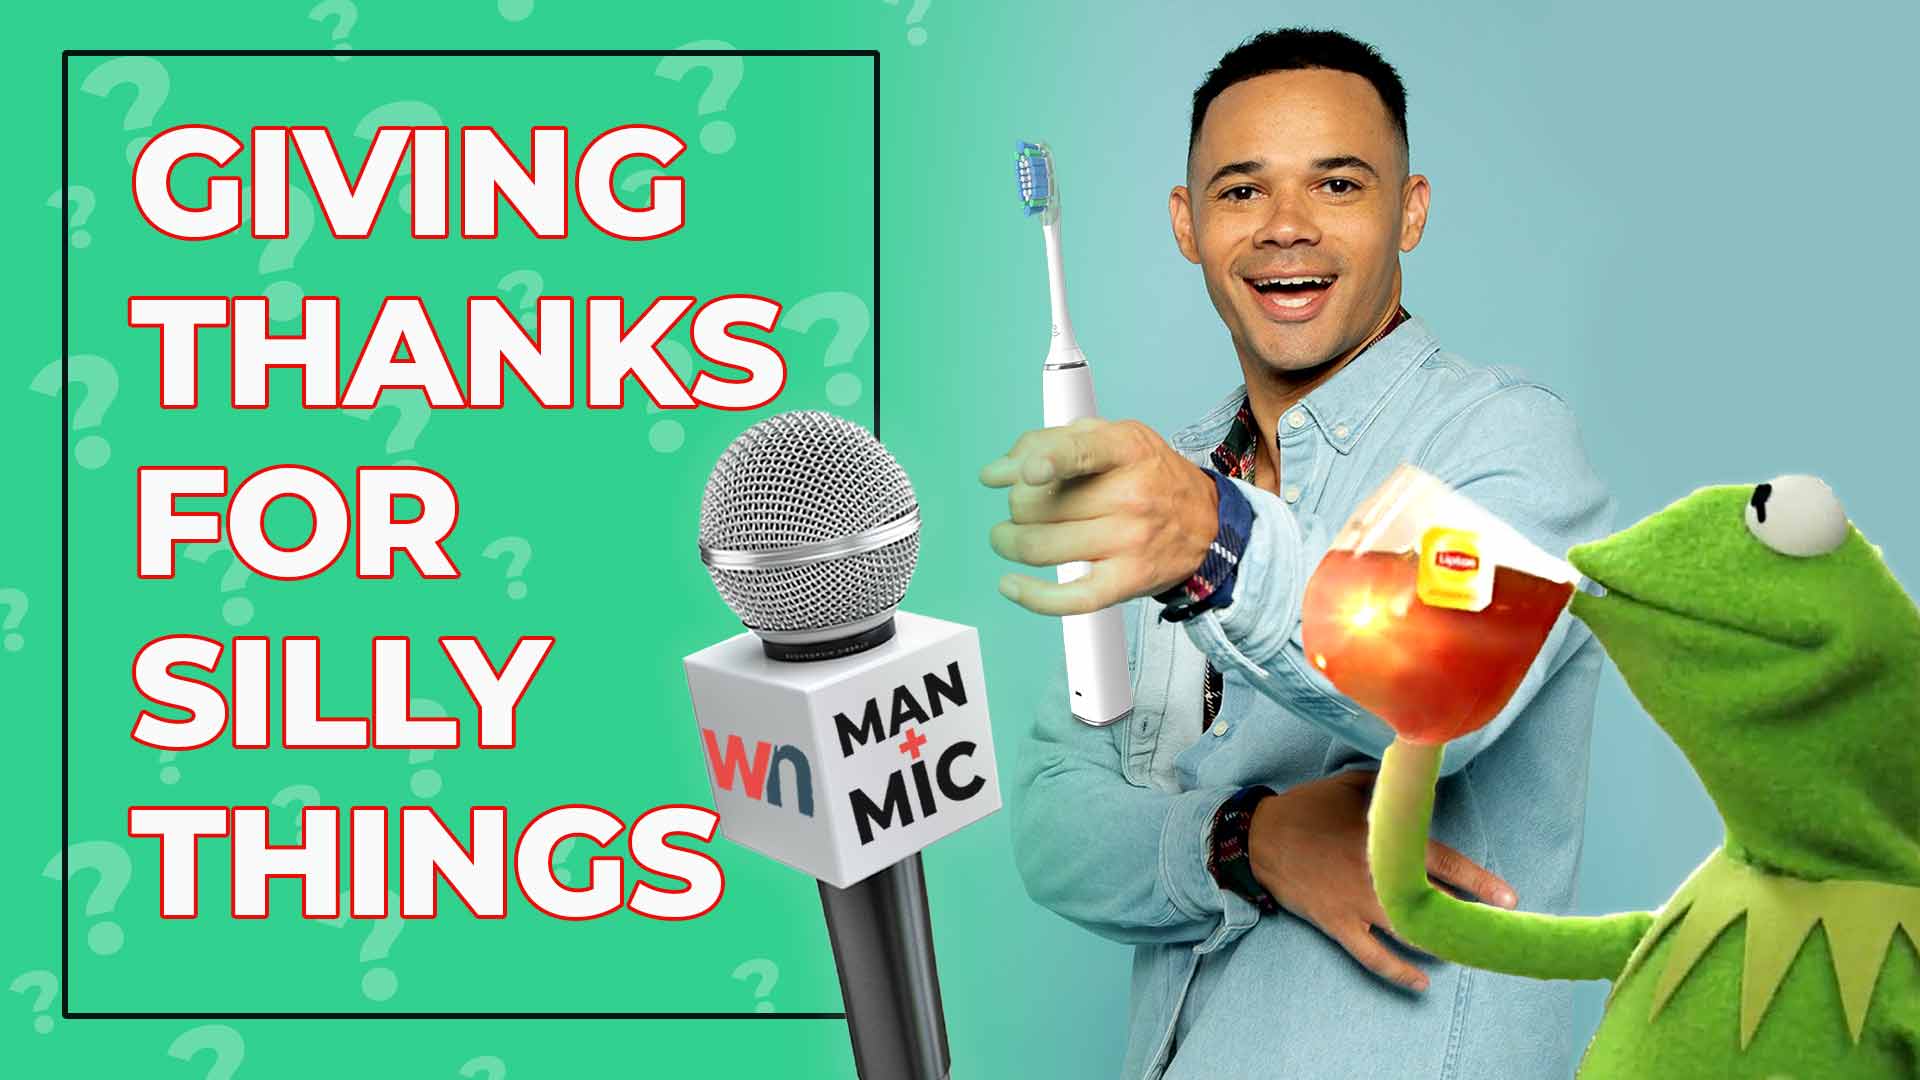 20 Silly Things Christian Artists are Thankful for | Tauren Wells